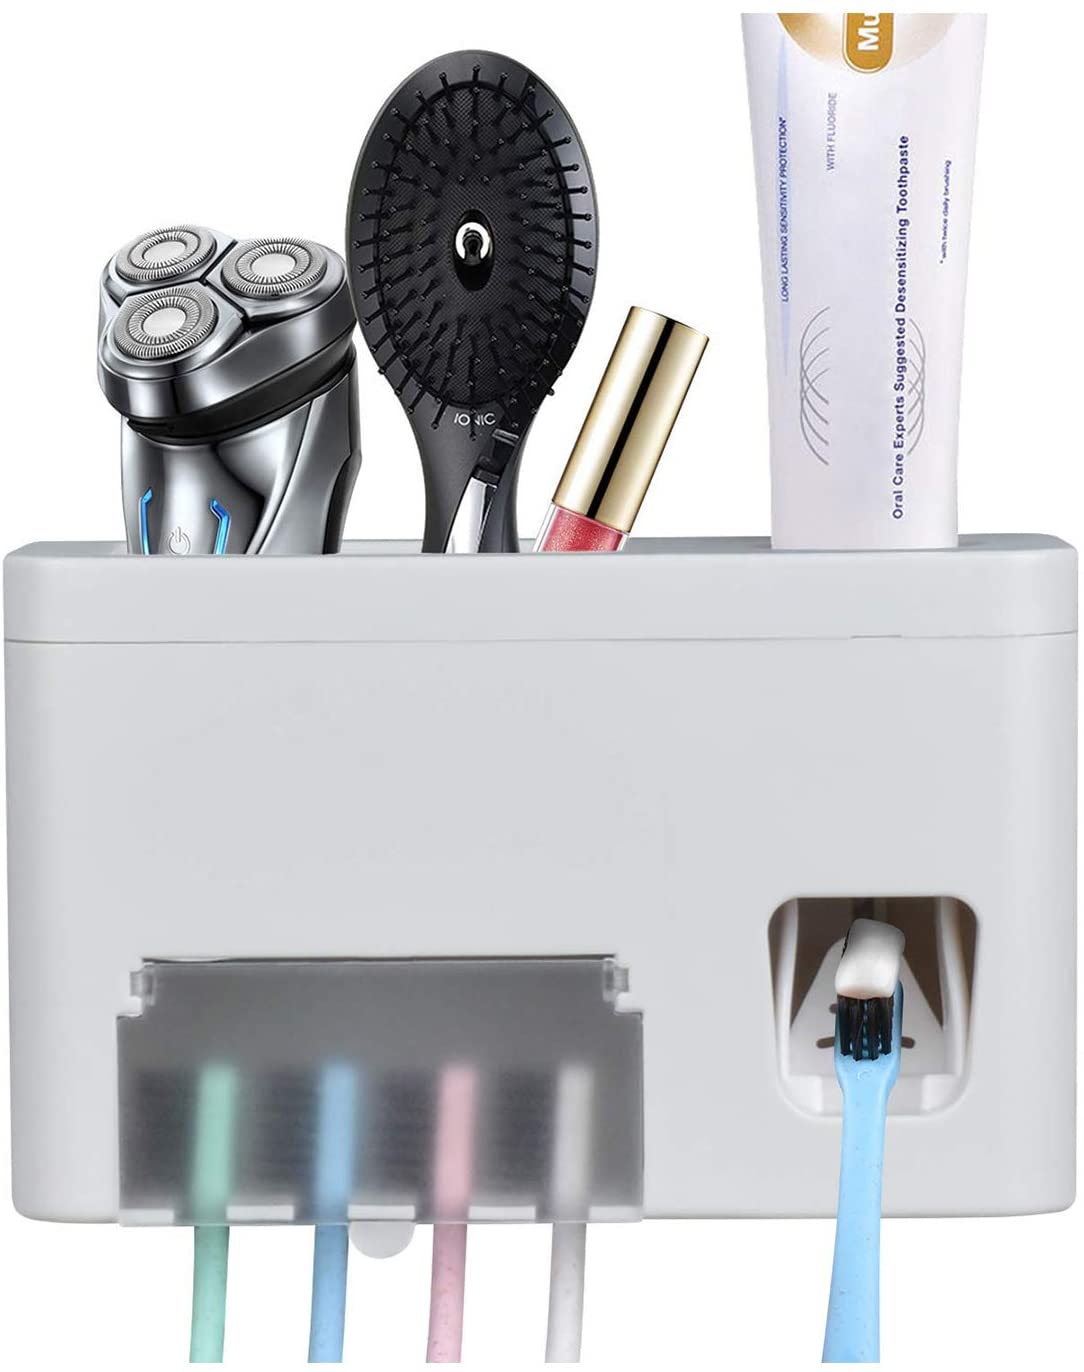 Catzon 3-in-1 Wall Mounted Toothpaste Dispenser + Toothbrush Holder + Toothpaste Squeezer with Storage Grids Set in Bathroom